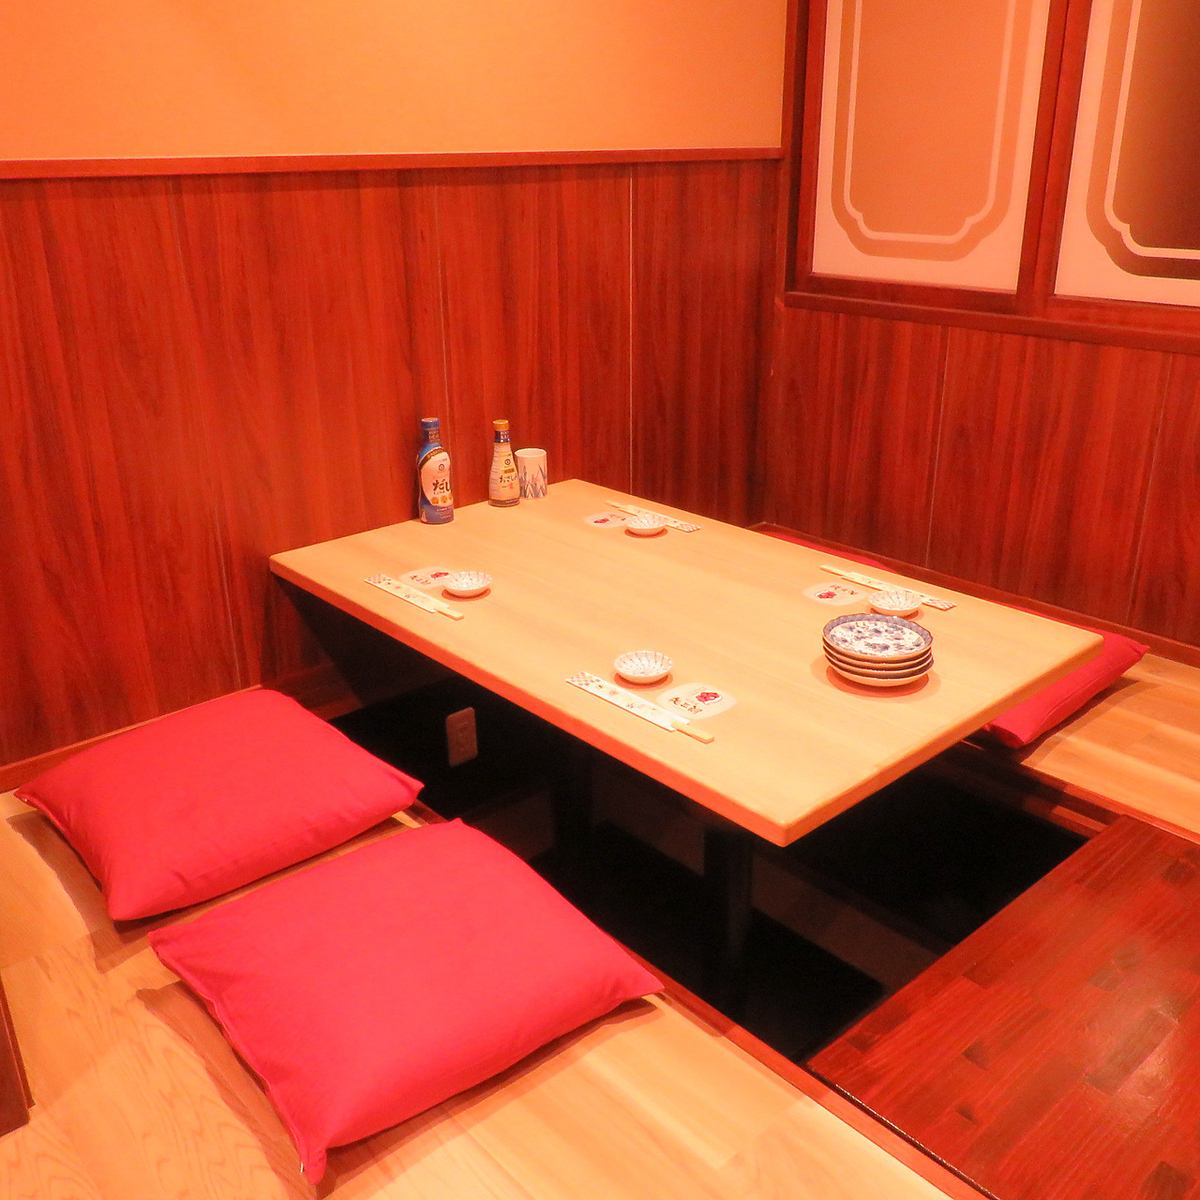 We offer private rooms for small groups! Ideal for private parties.